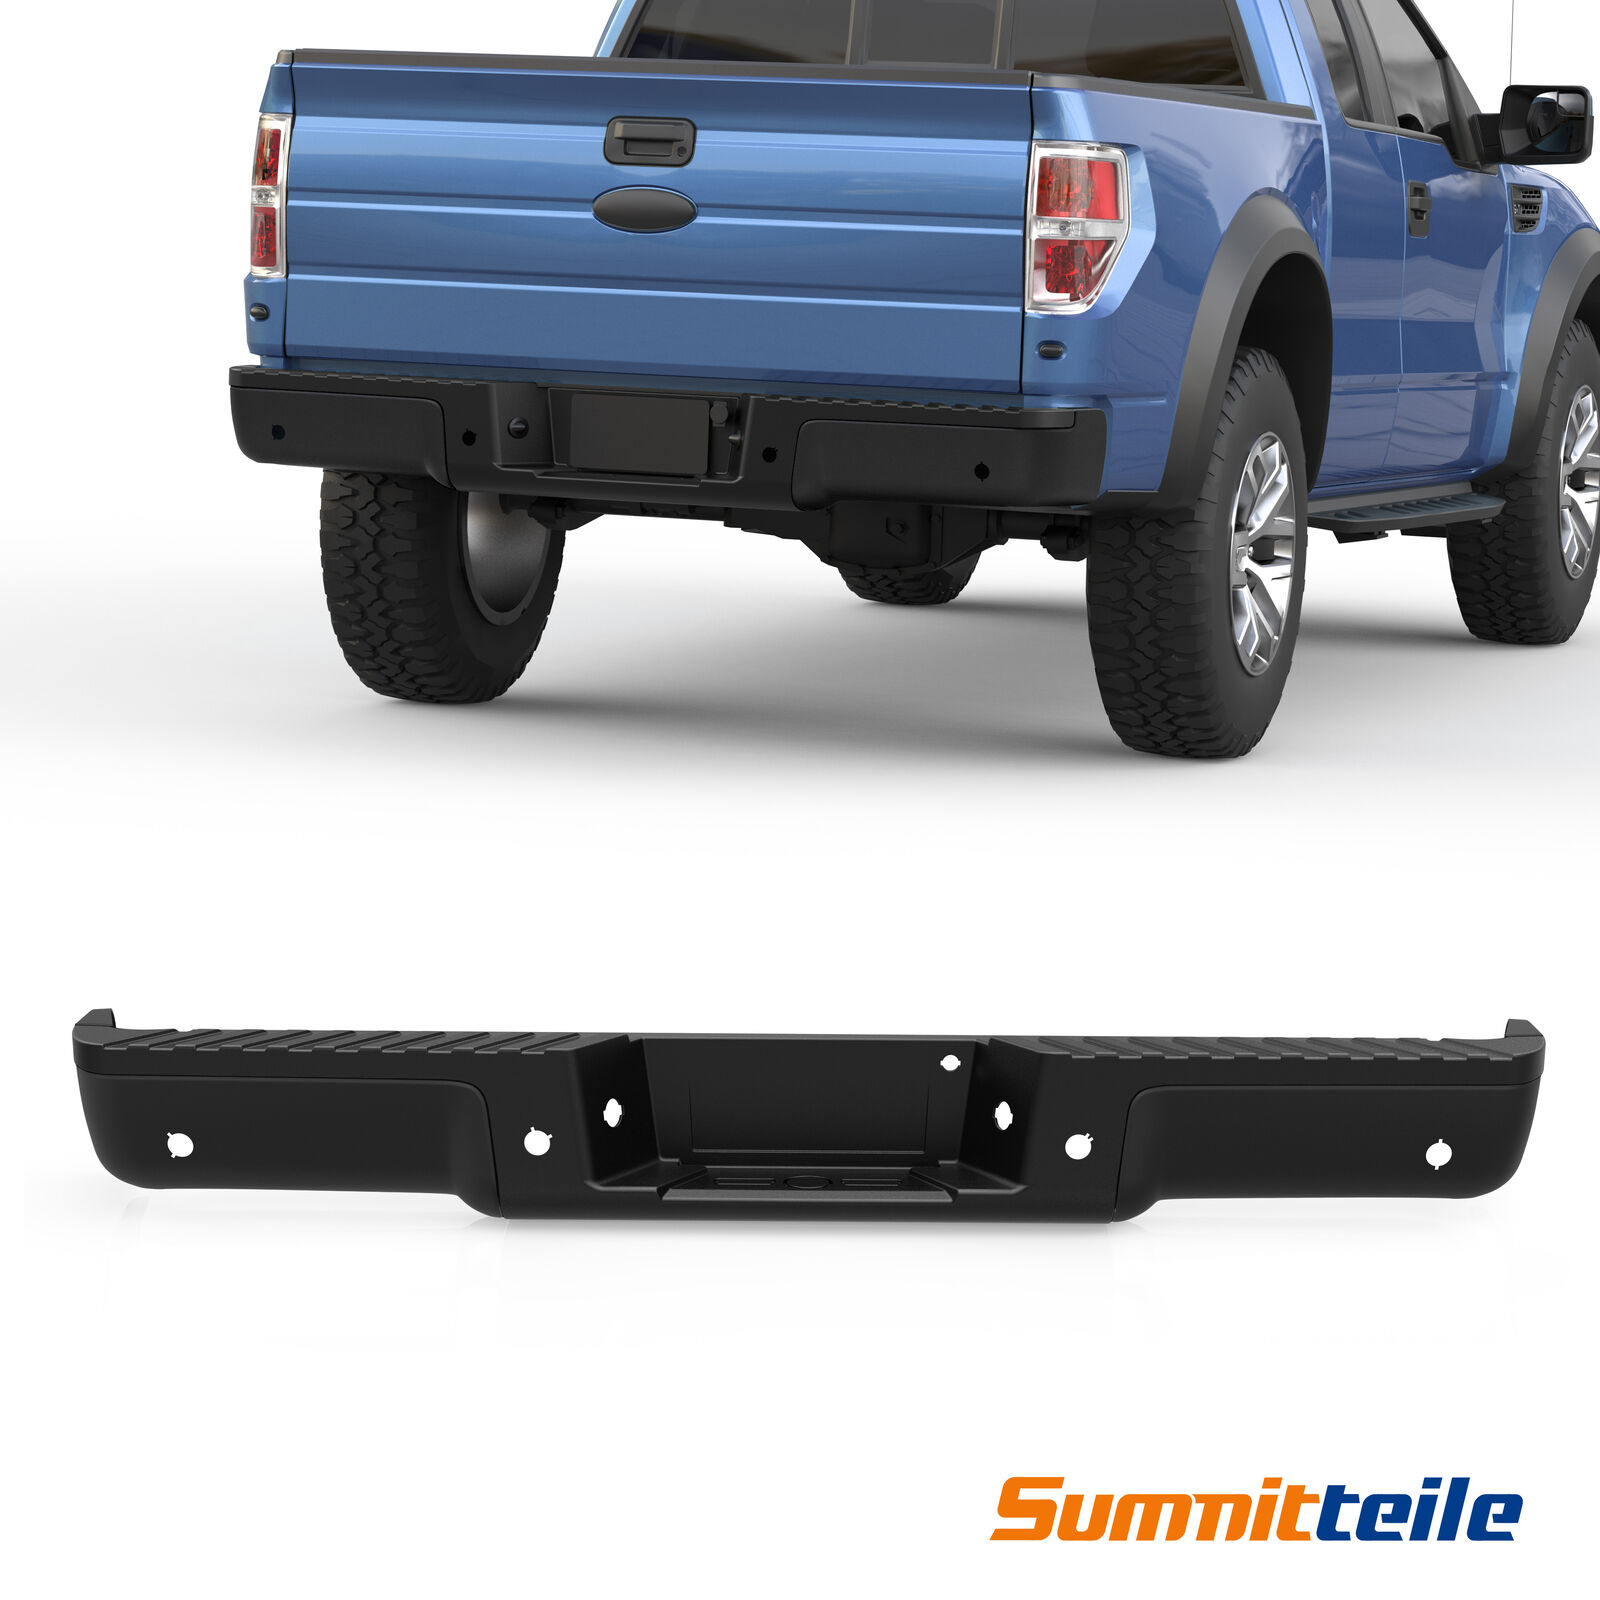 New Rear Bumper Assembly For 2009-2014 Ford F150 W/ Parking aid Sensor Holes